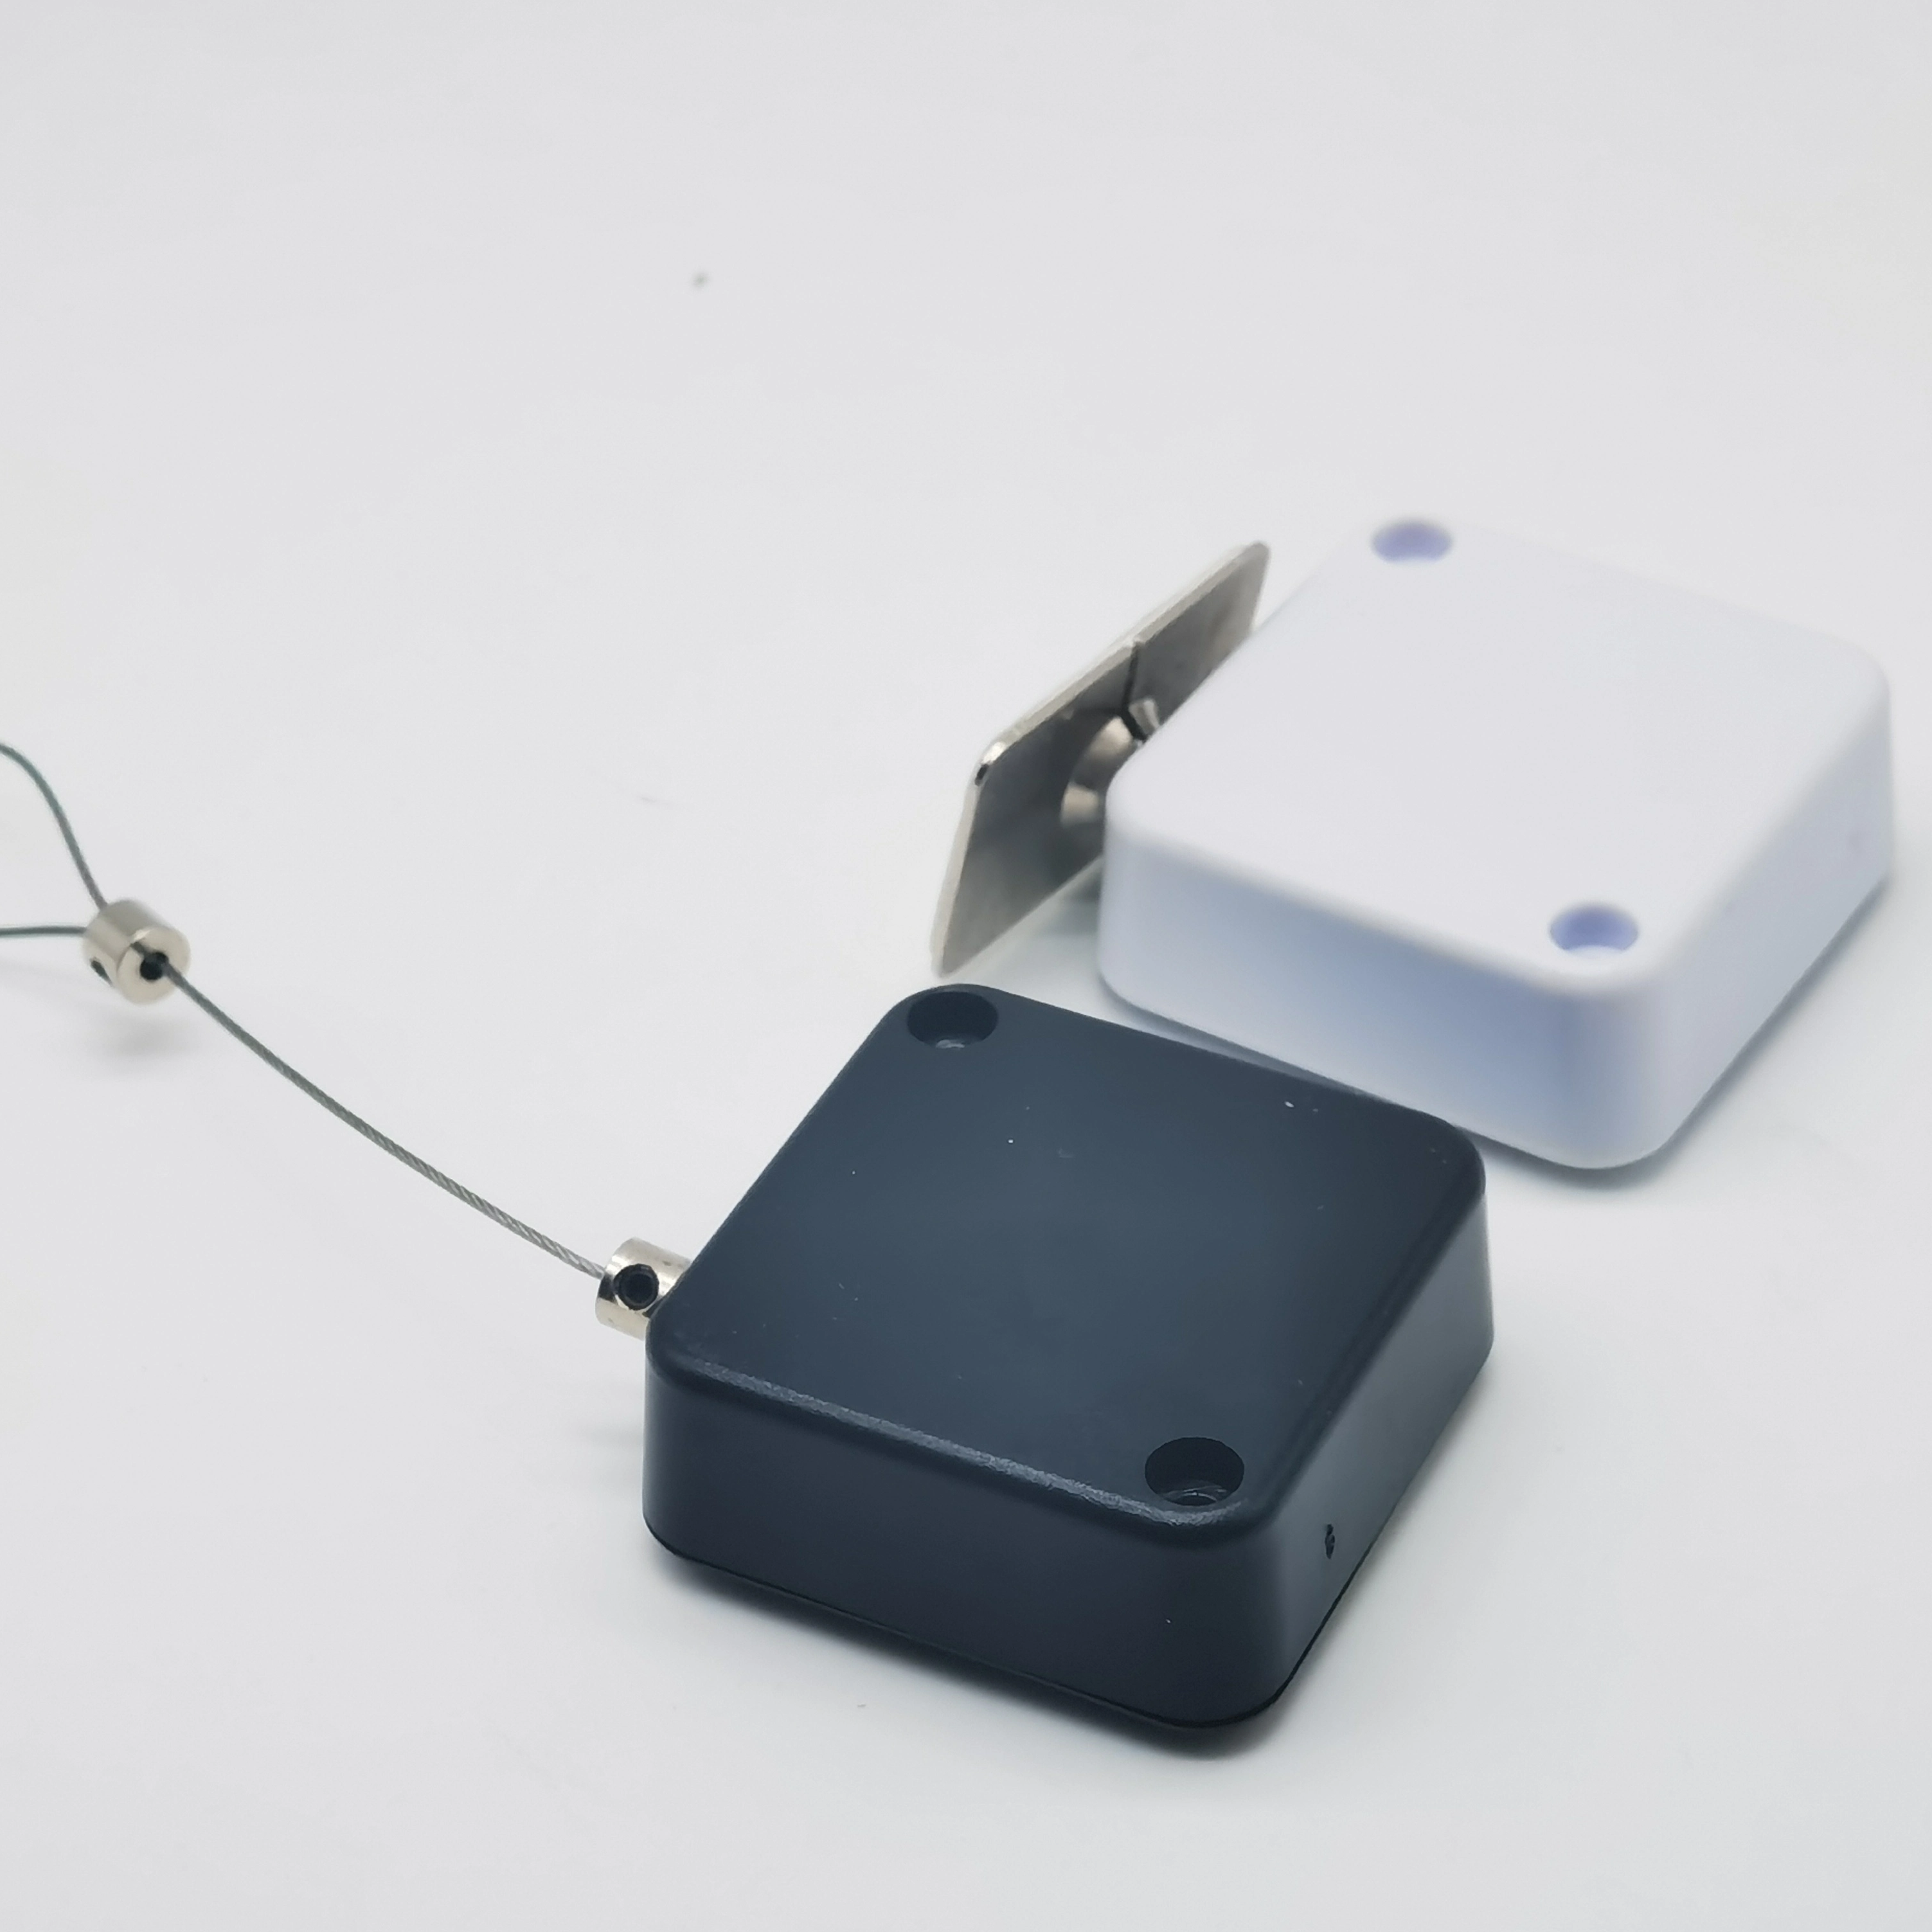 Positional Retractable Square Desktop Customized Tether